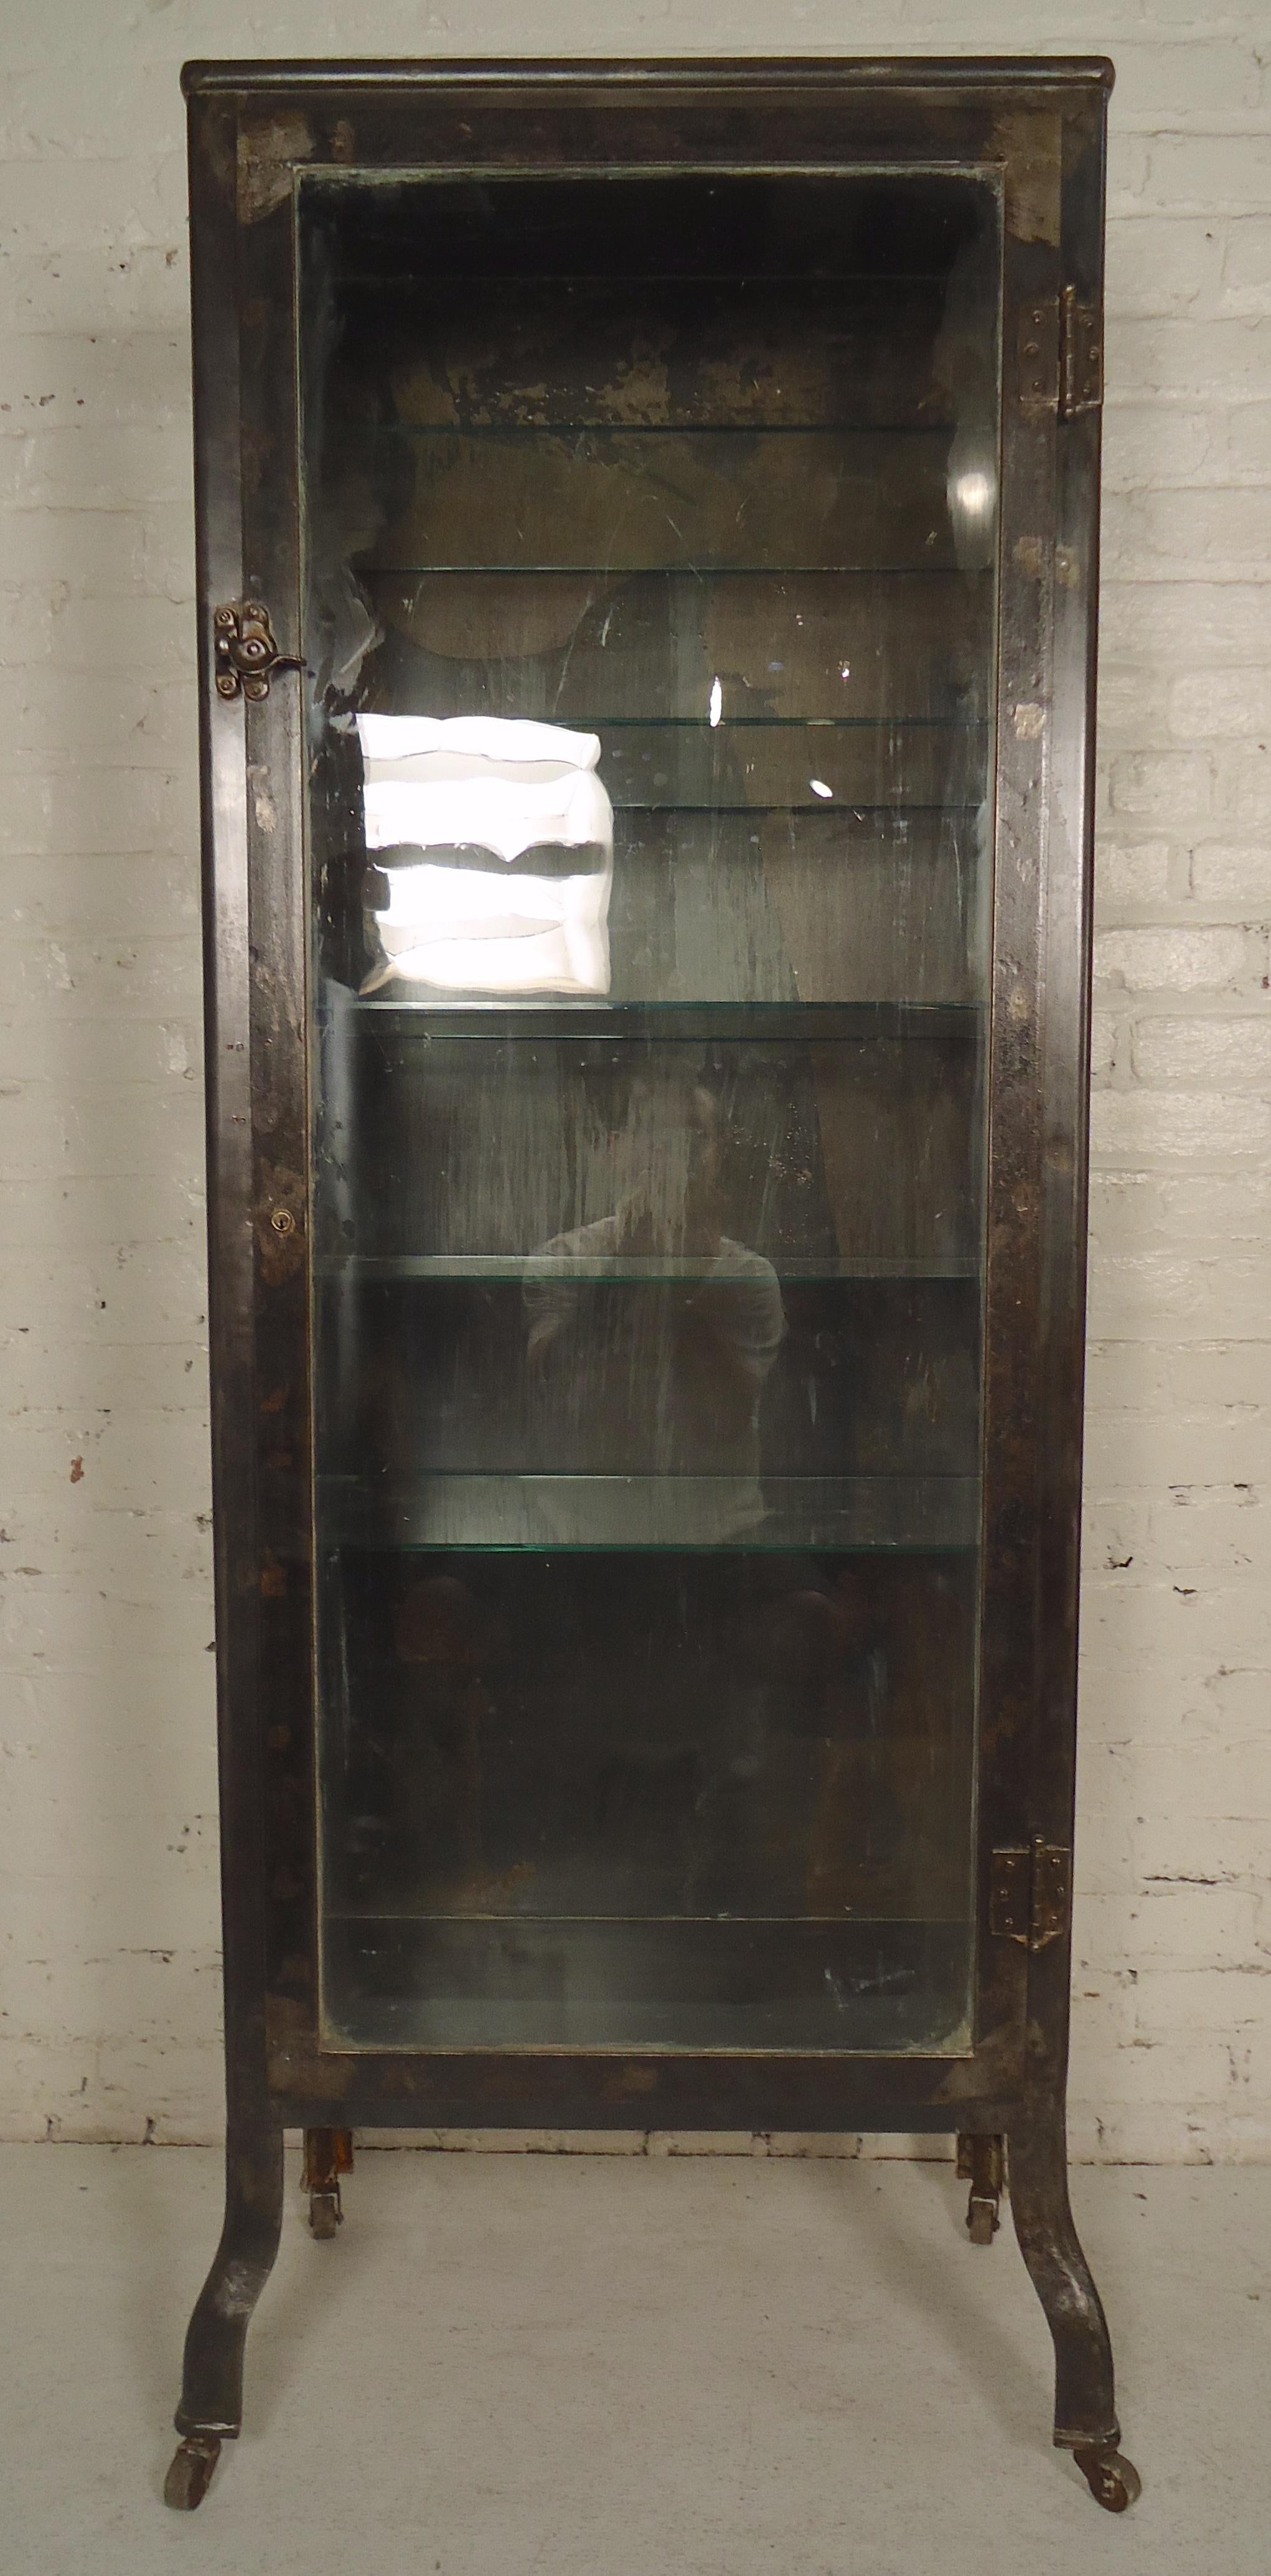 Tall metal cabinet with glass front and sides, newly restored in a bare metal style finish. Includes five glass shelves.

(Please confirm item location - NY or NJ - with dealer).
 